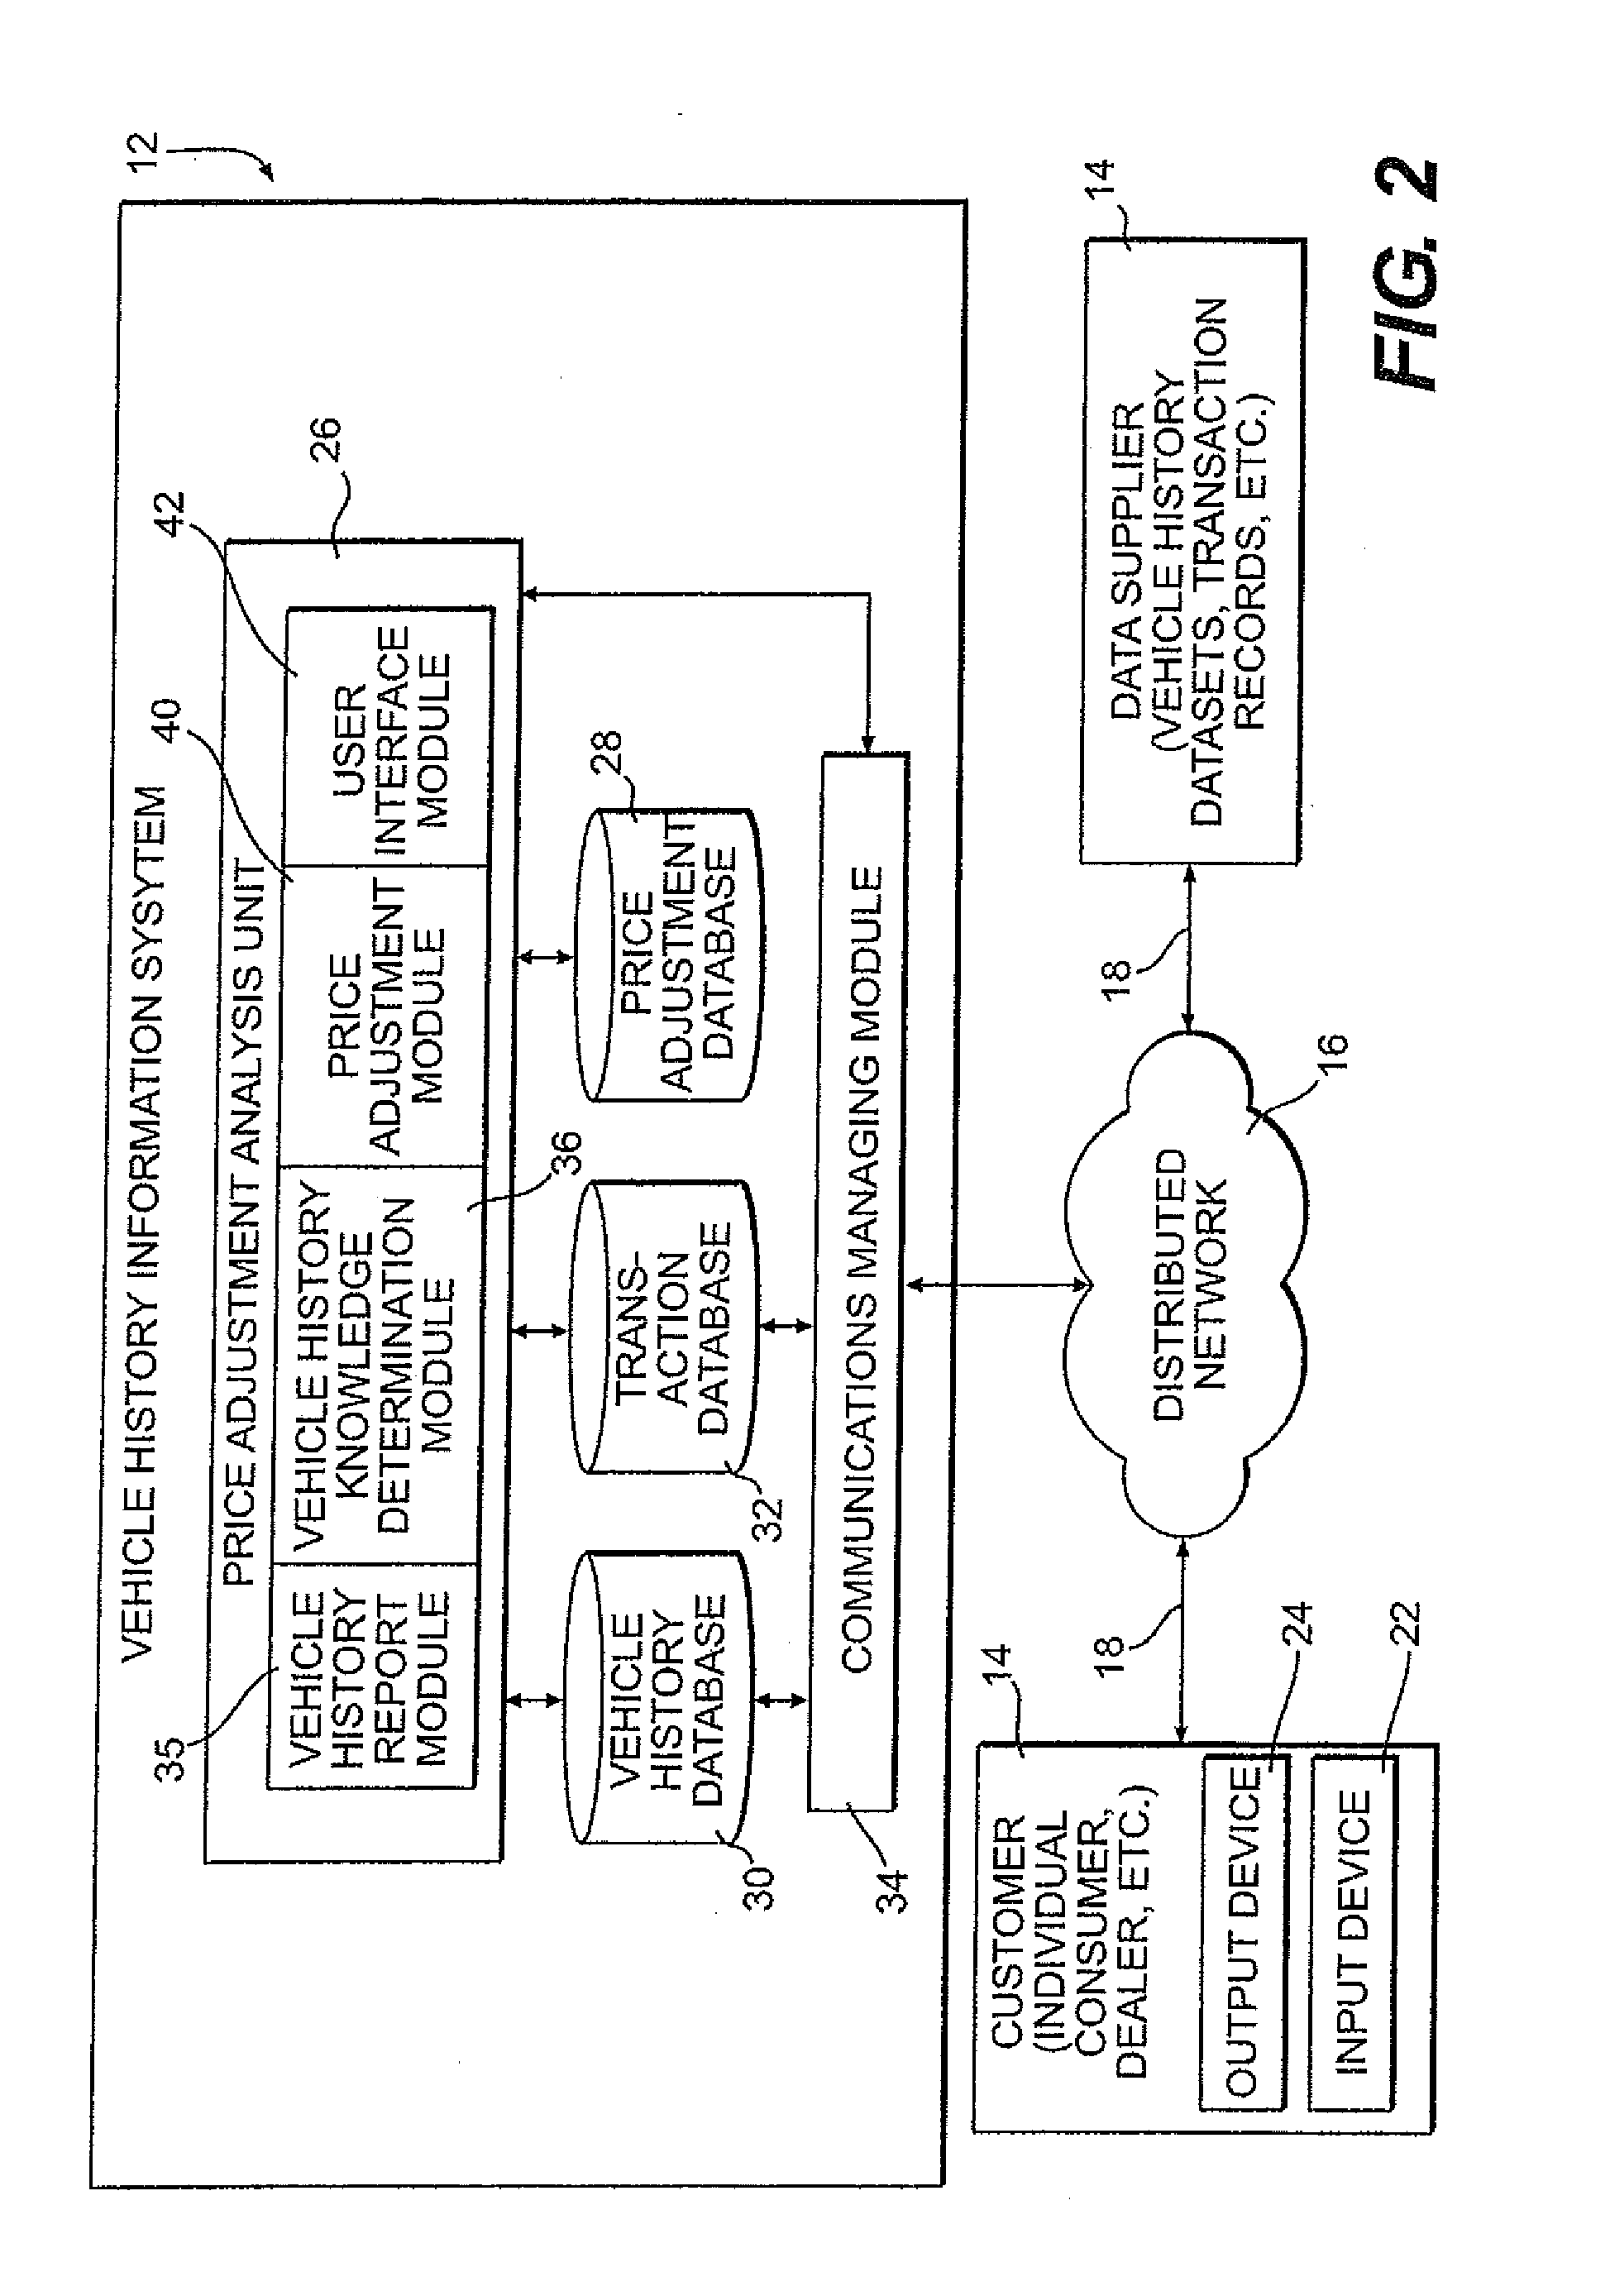 System and method for determining vehicle price values